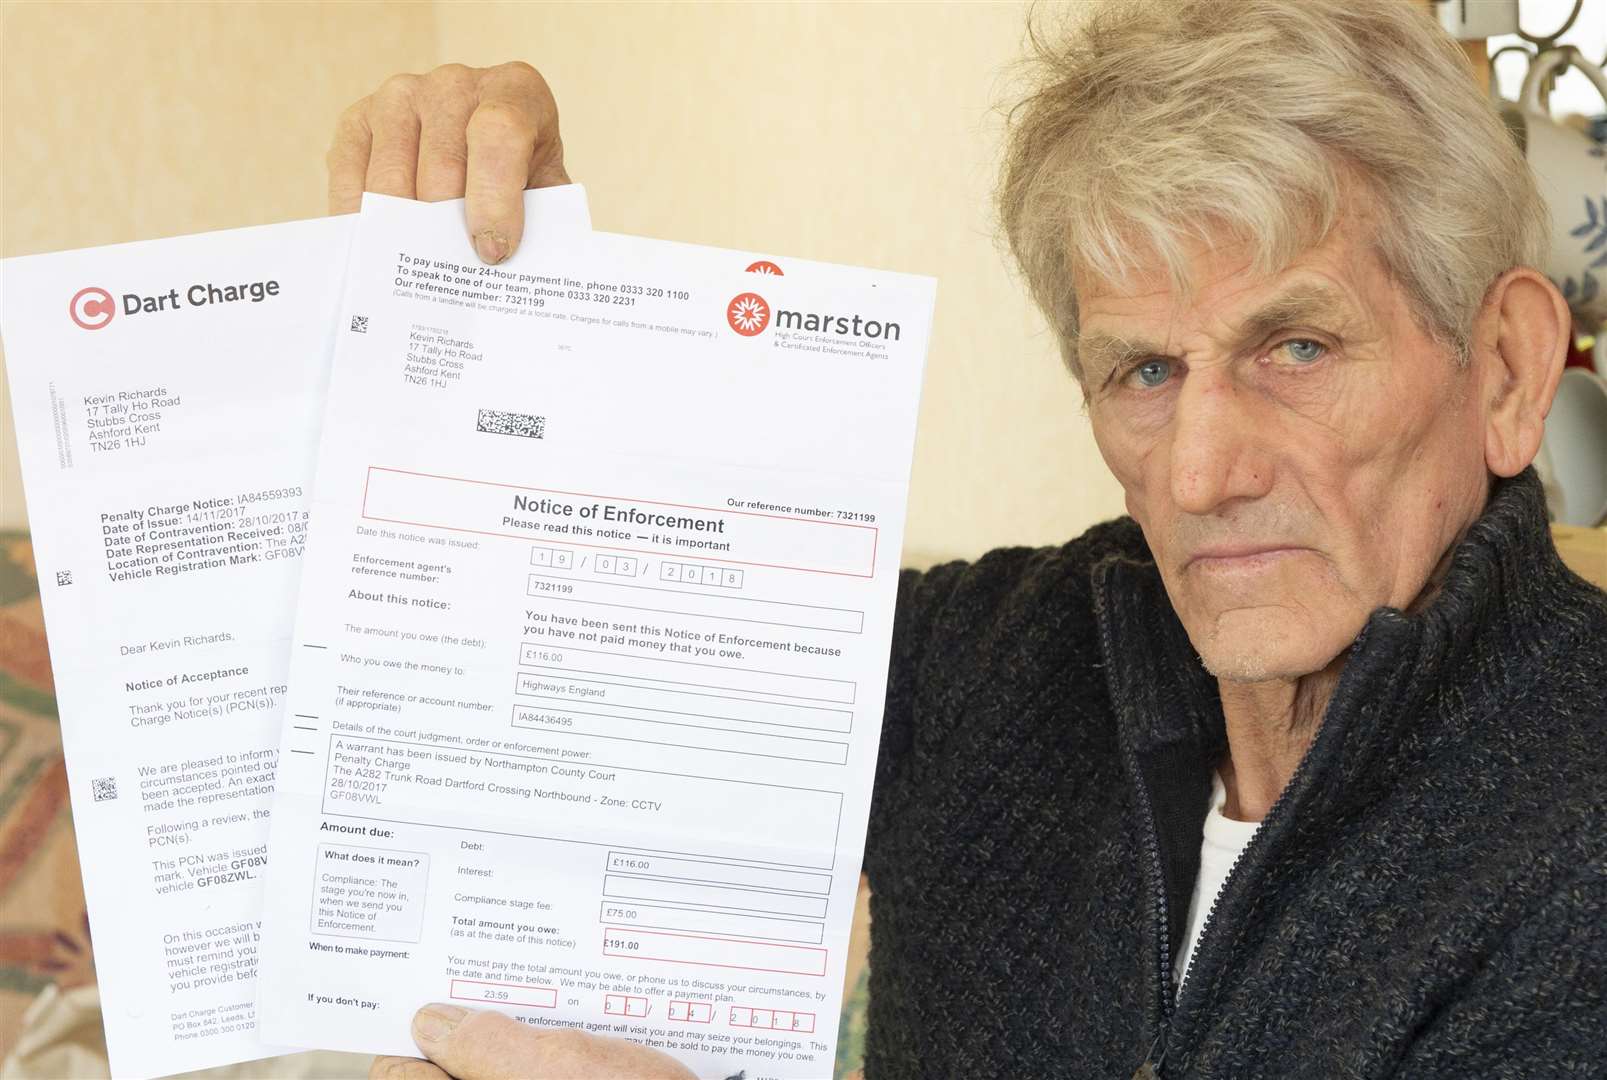 Kevin Richards, of Boldshaves Lane, Woodchurch, shows paperwork in his battle with Highways England